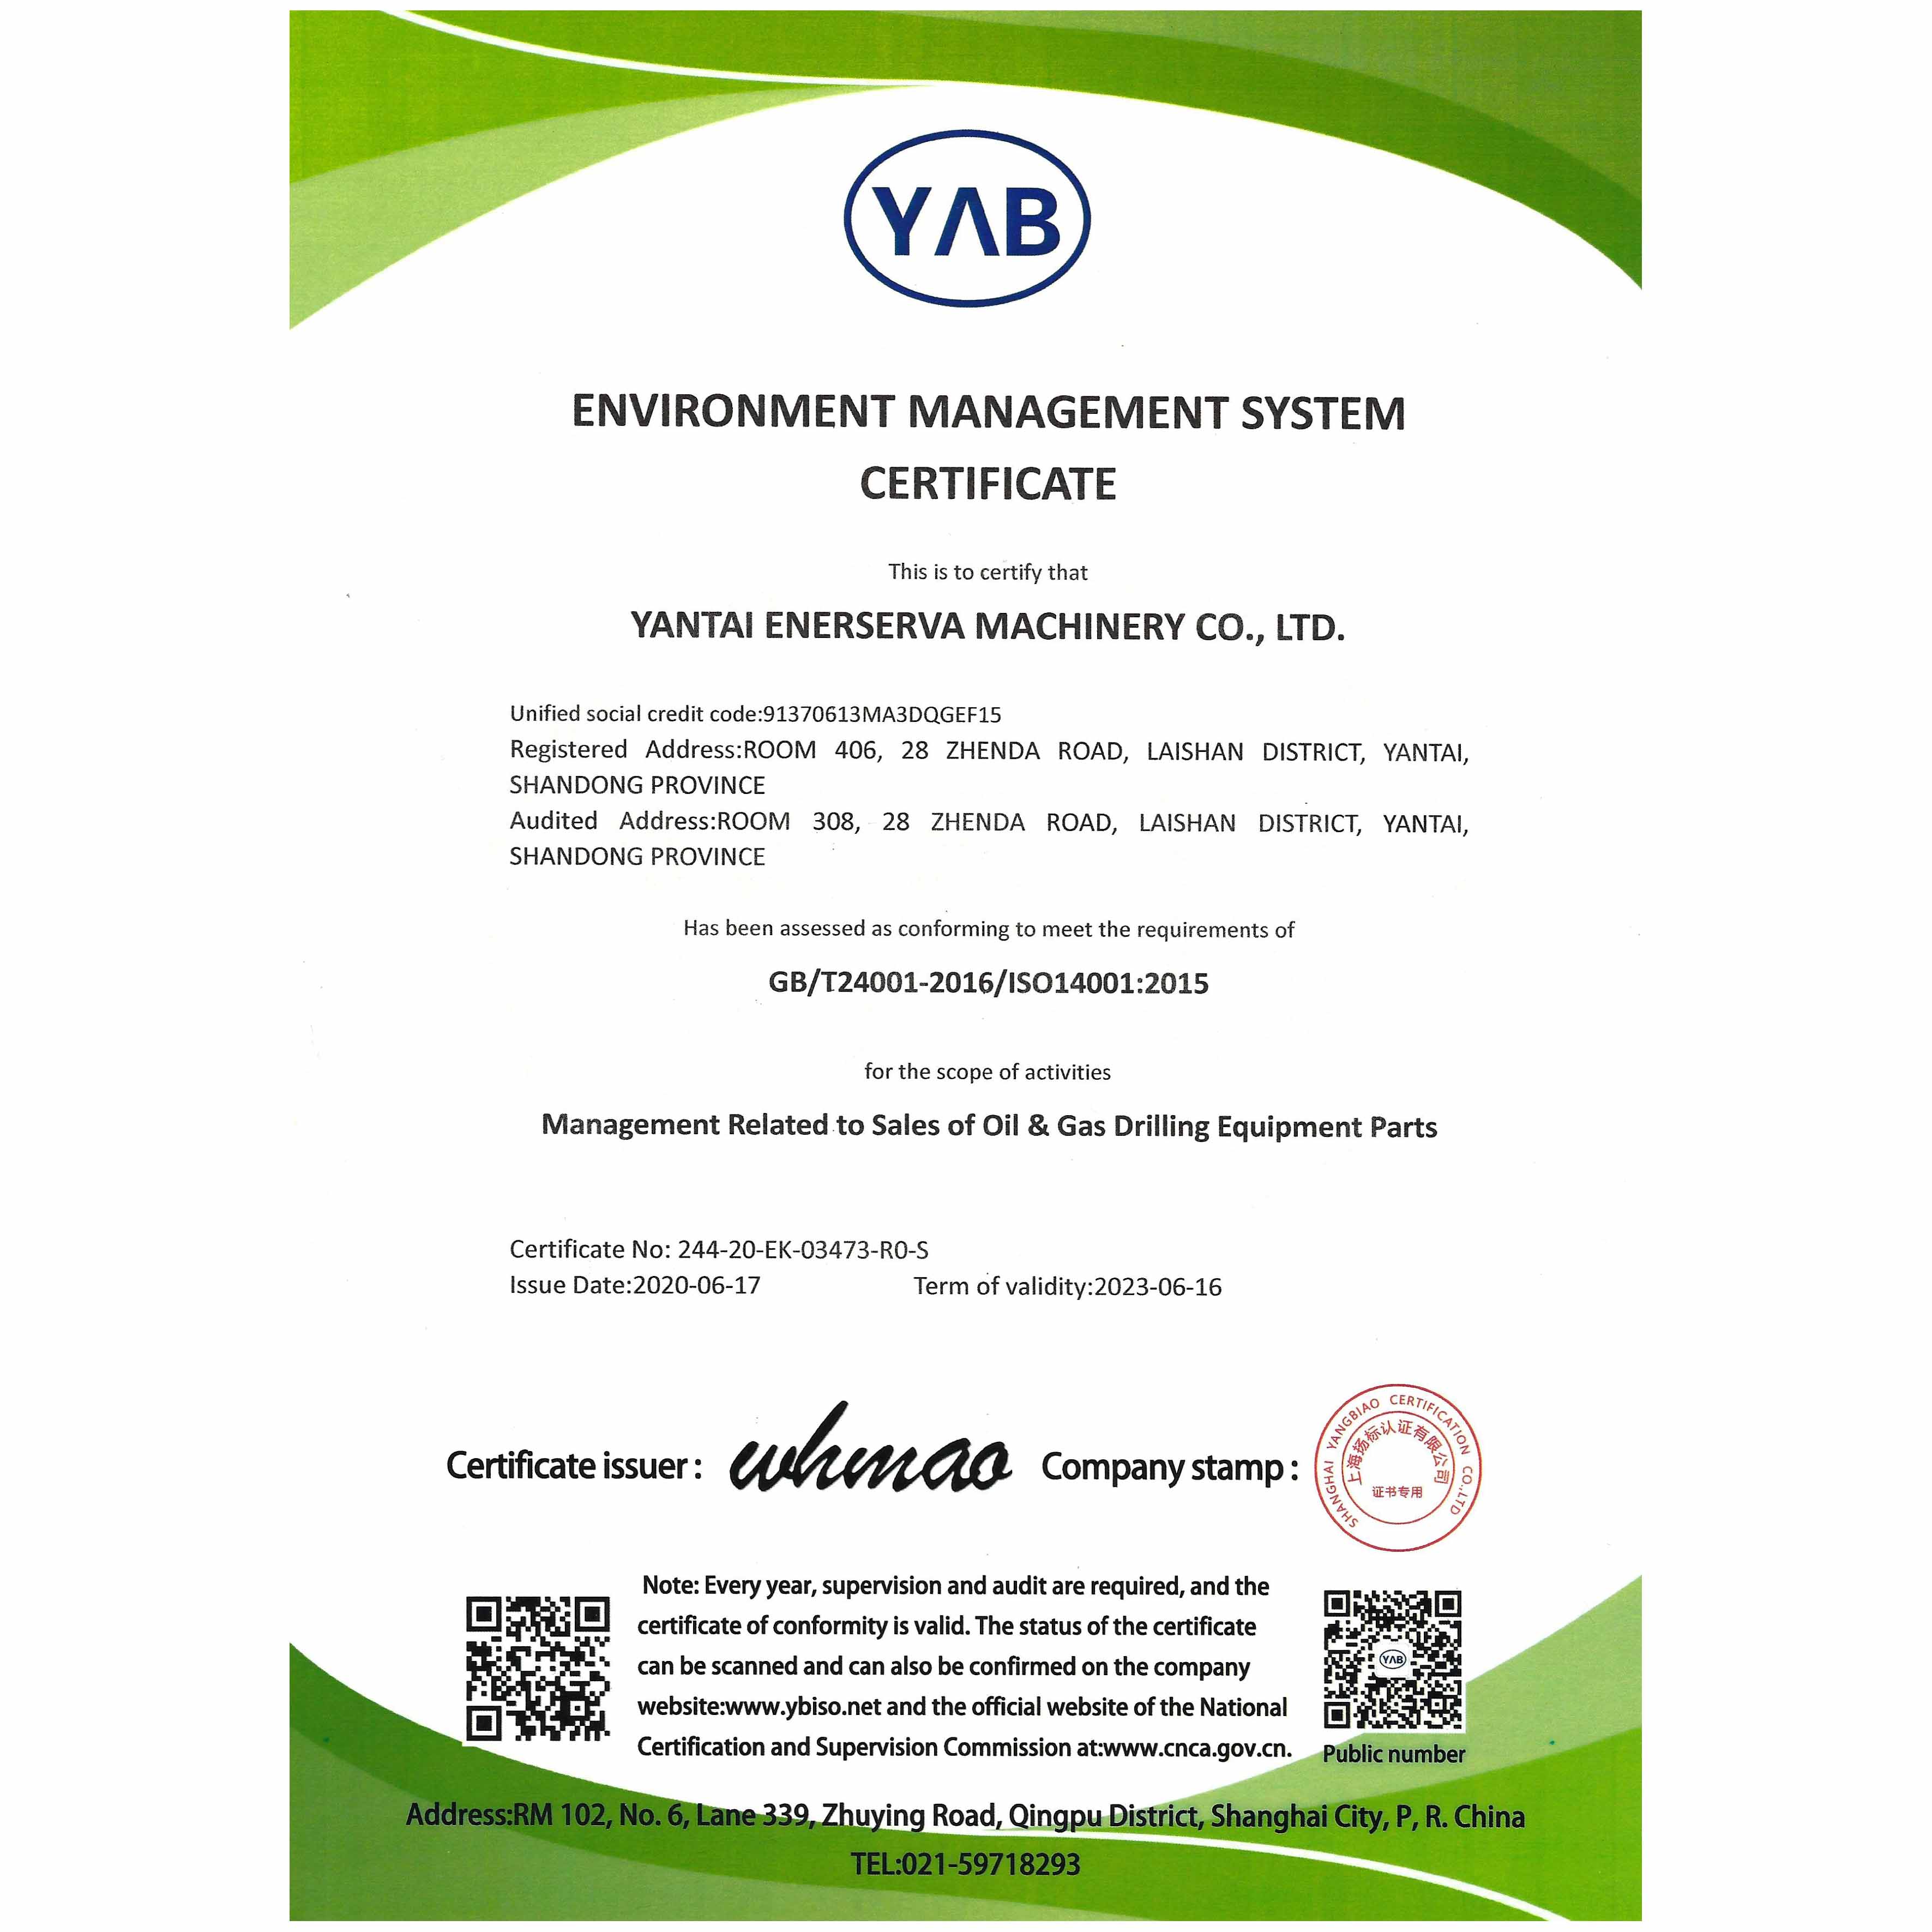 NEW ISO 14001:2015 CERTIFICATE